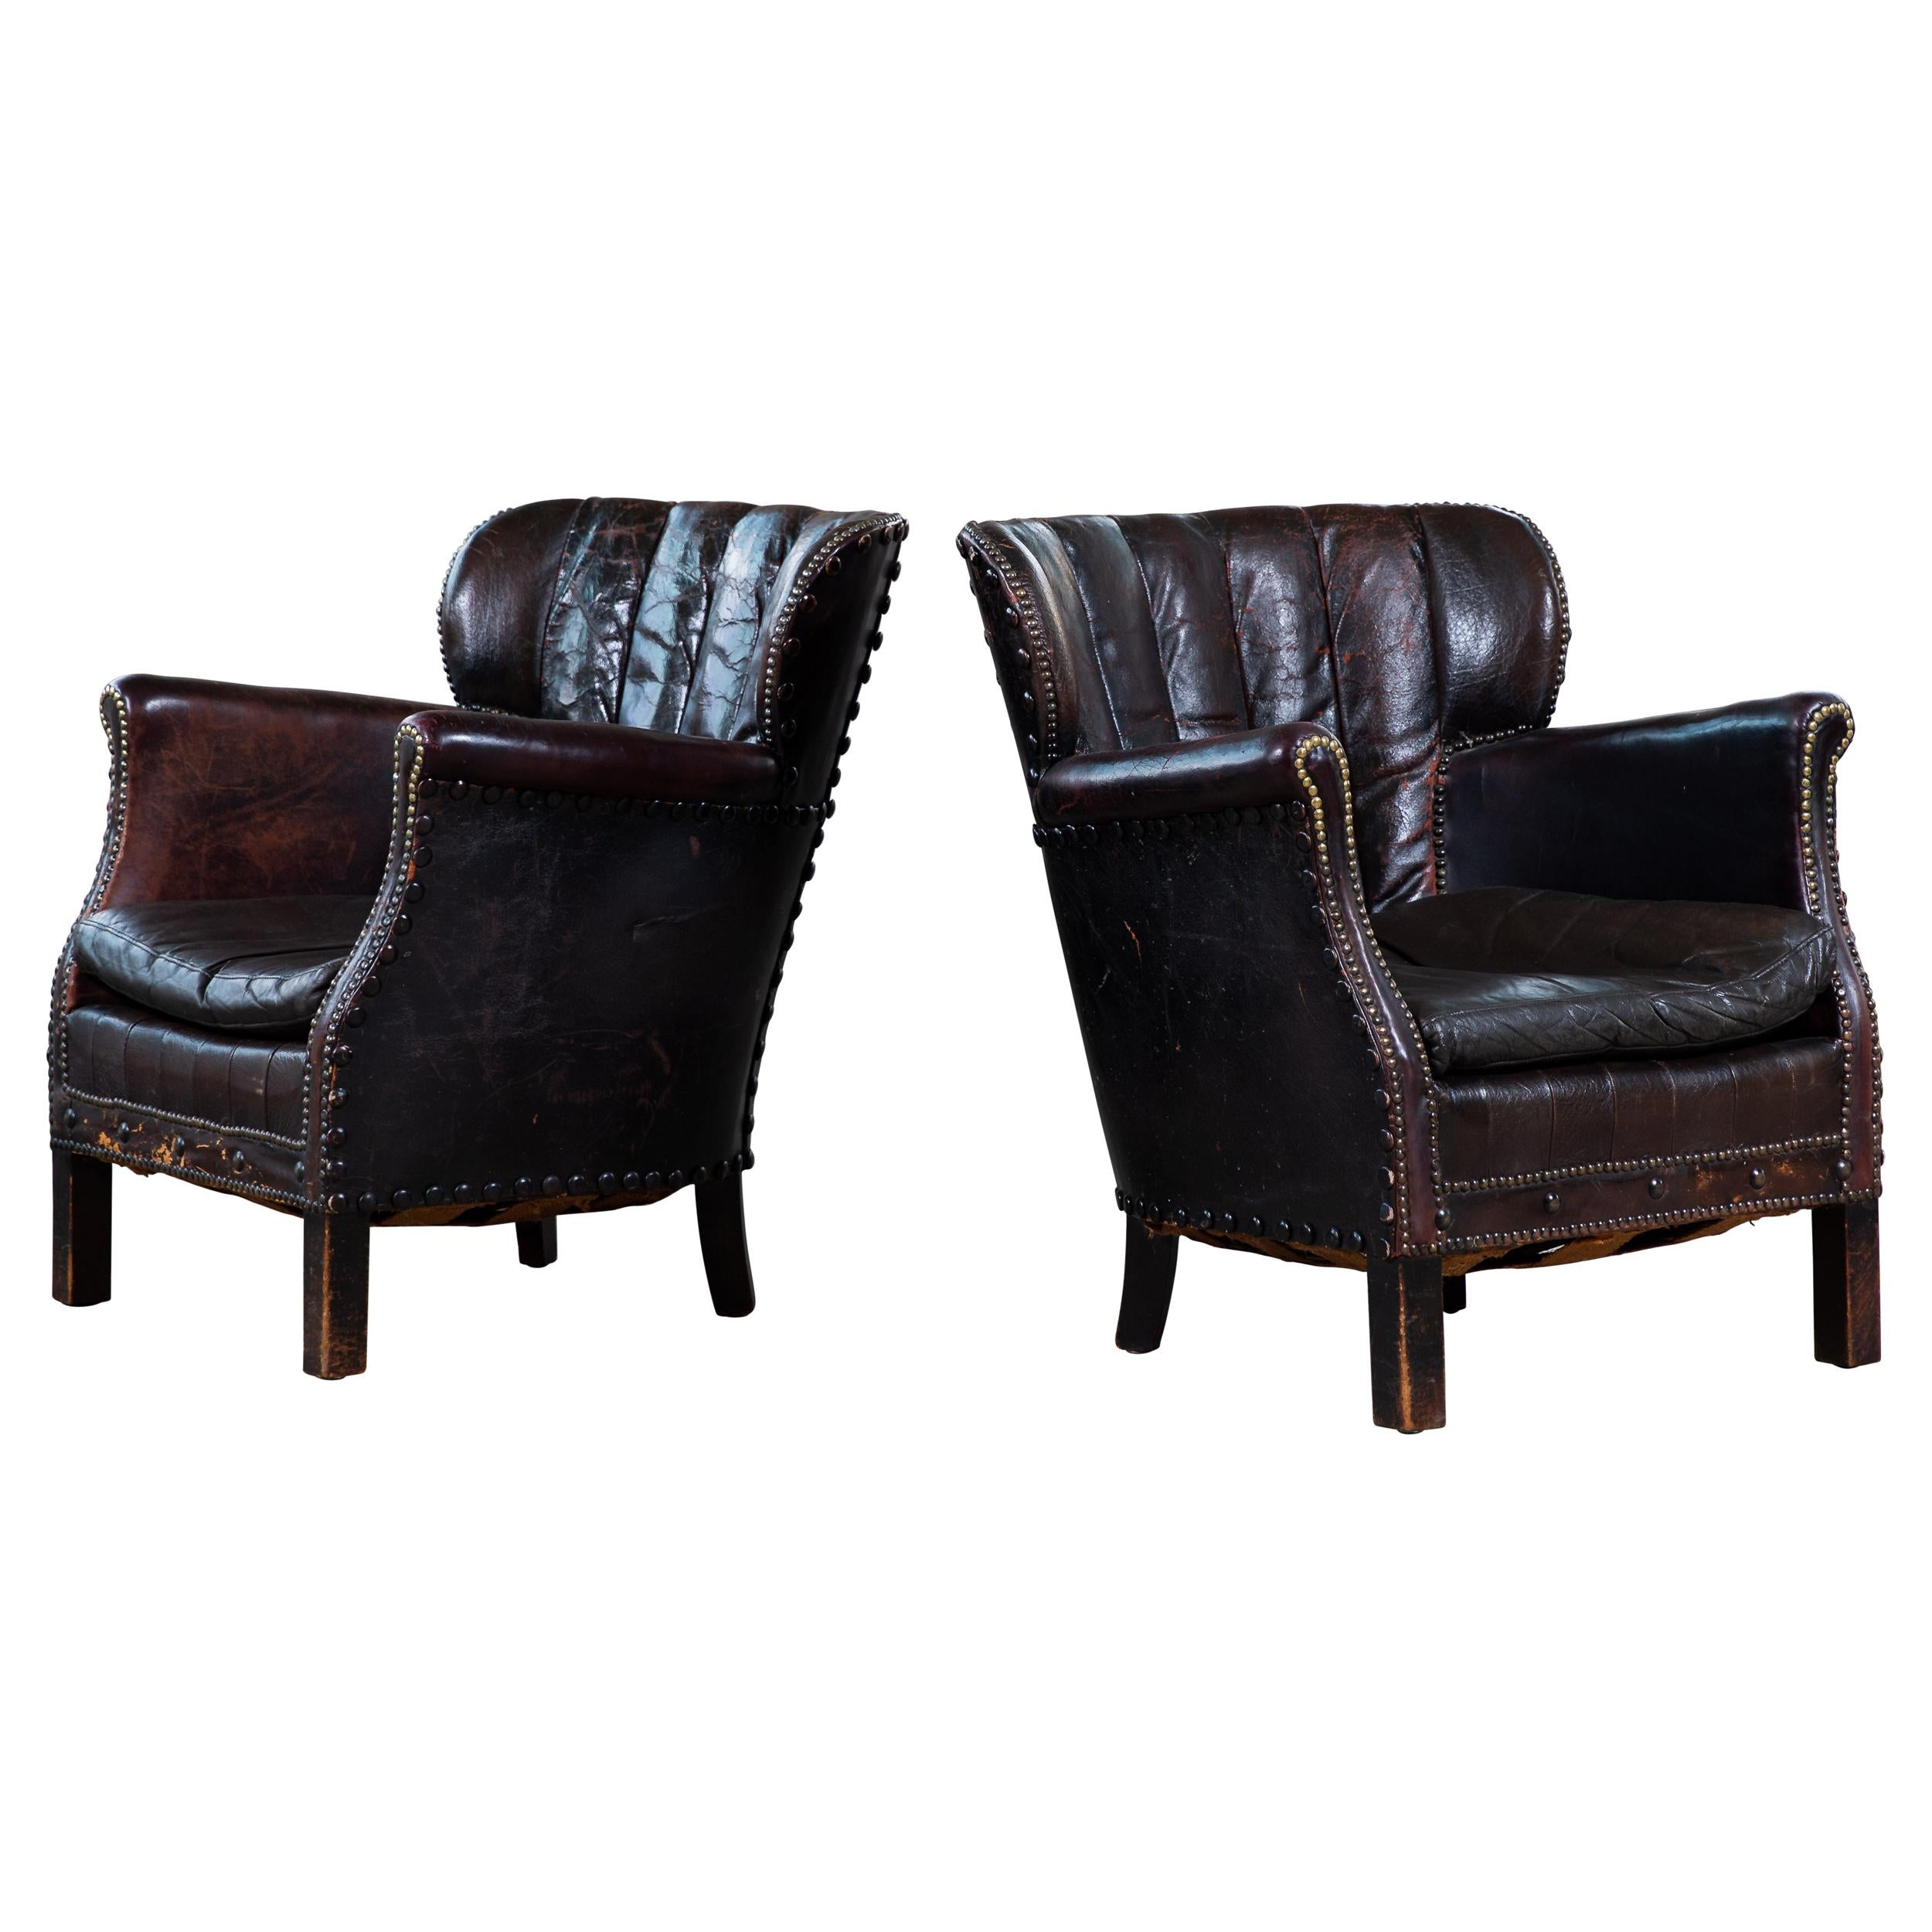 Pair of 1930's Classic Danish Club Chairs in Black Patinated Leather